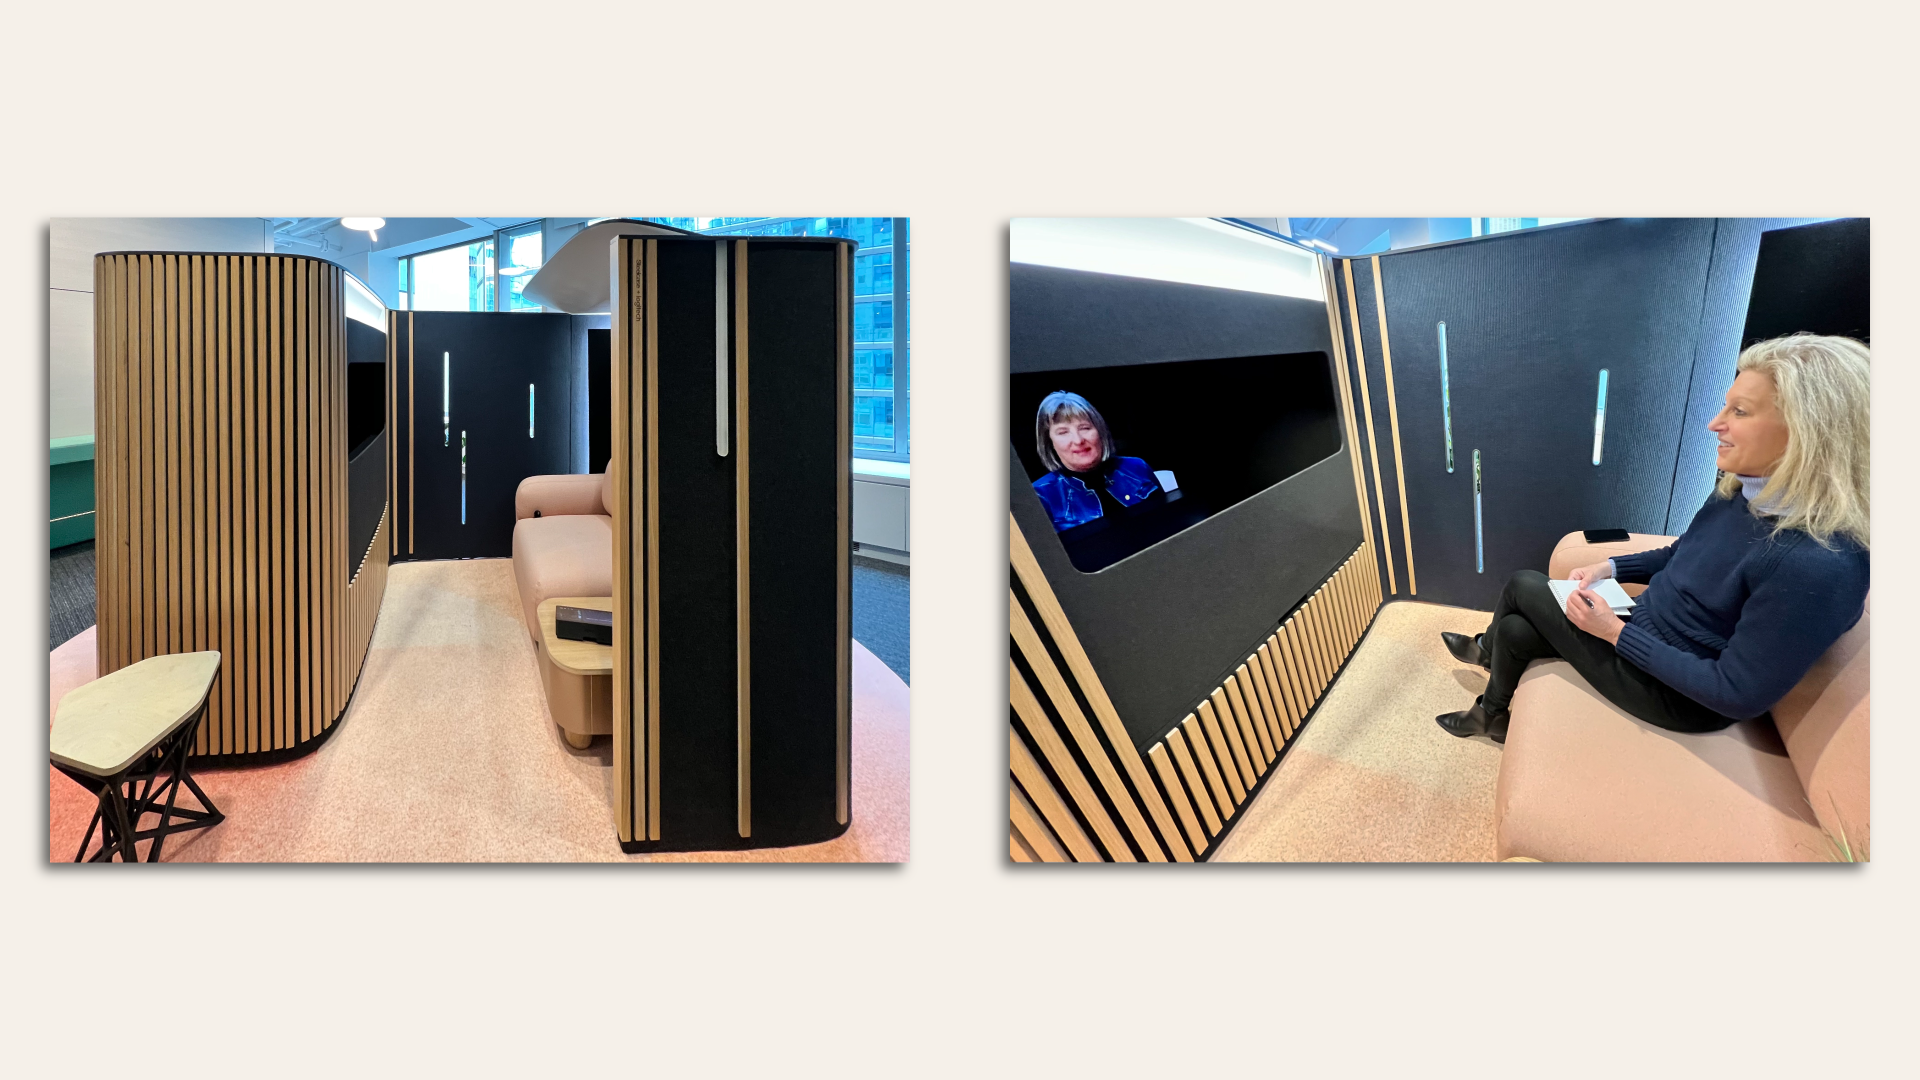 At left, a view of the Project Ghost videoconferencing booth; at right, a picture of two people conversing inside the booth.